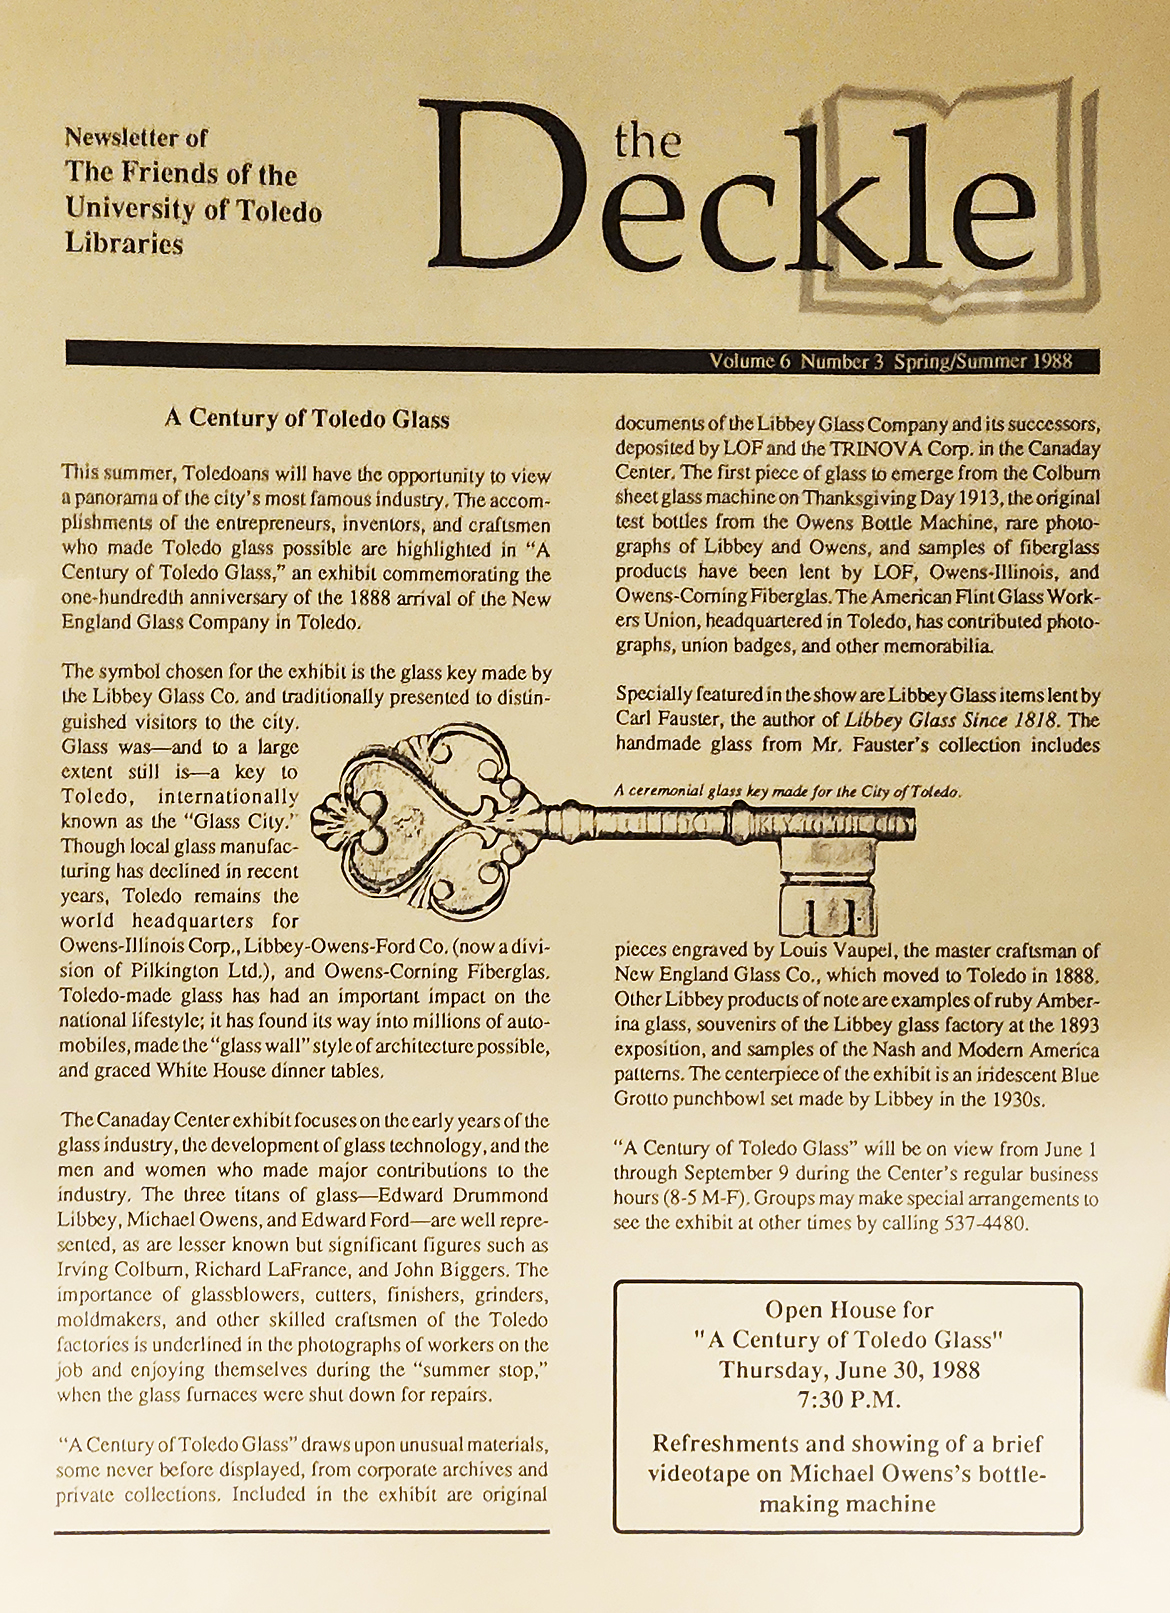 A Century of Toledo Glass; Article in the Spring/Summer 1988 issue of the Deckler